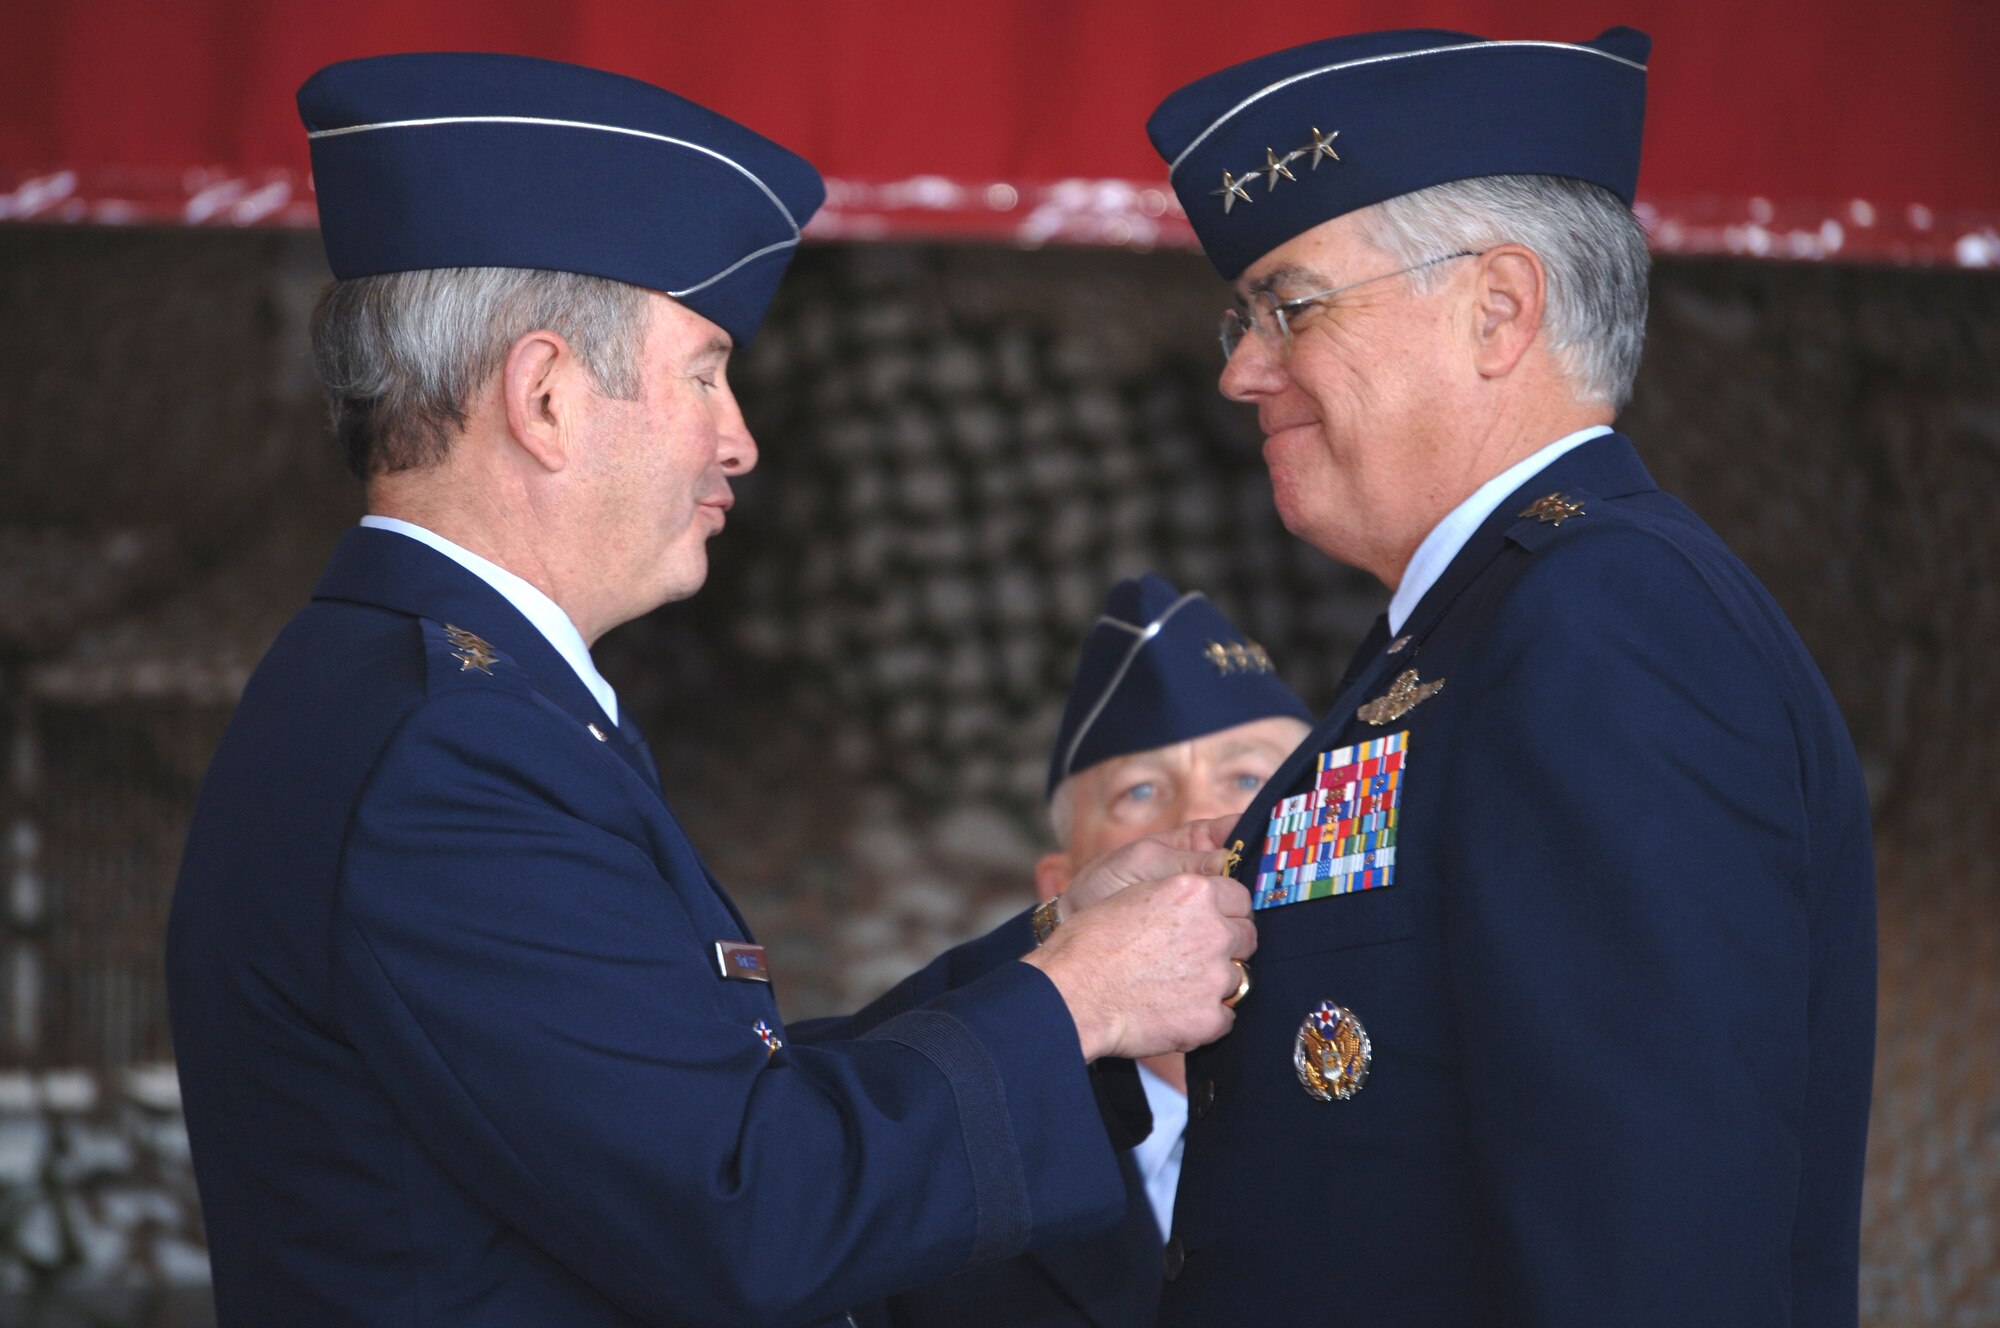 Gen. Duncan McNabb, Air Force vice chief of staff, presents the Distinguished Service Medal to Lt. Gen. Mike Wooley, former Air Force Special Operations Command commander, during the AFSOC change of command ceremony Nov. 27 at Hurlburt Field, Fla. General Wooley relinquished command to Lt. Gen. Donny Wurster during the ceremony and will retire Jan. 1 after a 35-year Air Force career. (U.S. Air Force photo/Senior Airman Ali Flisek)